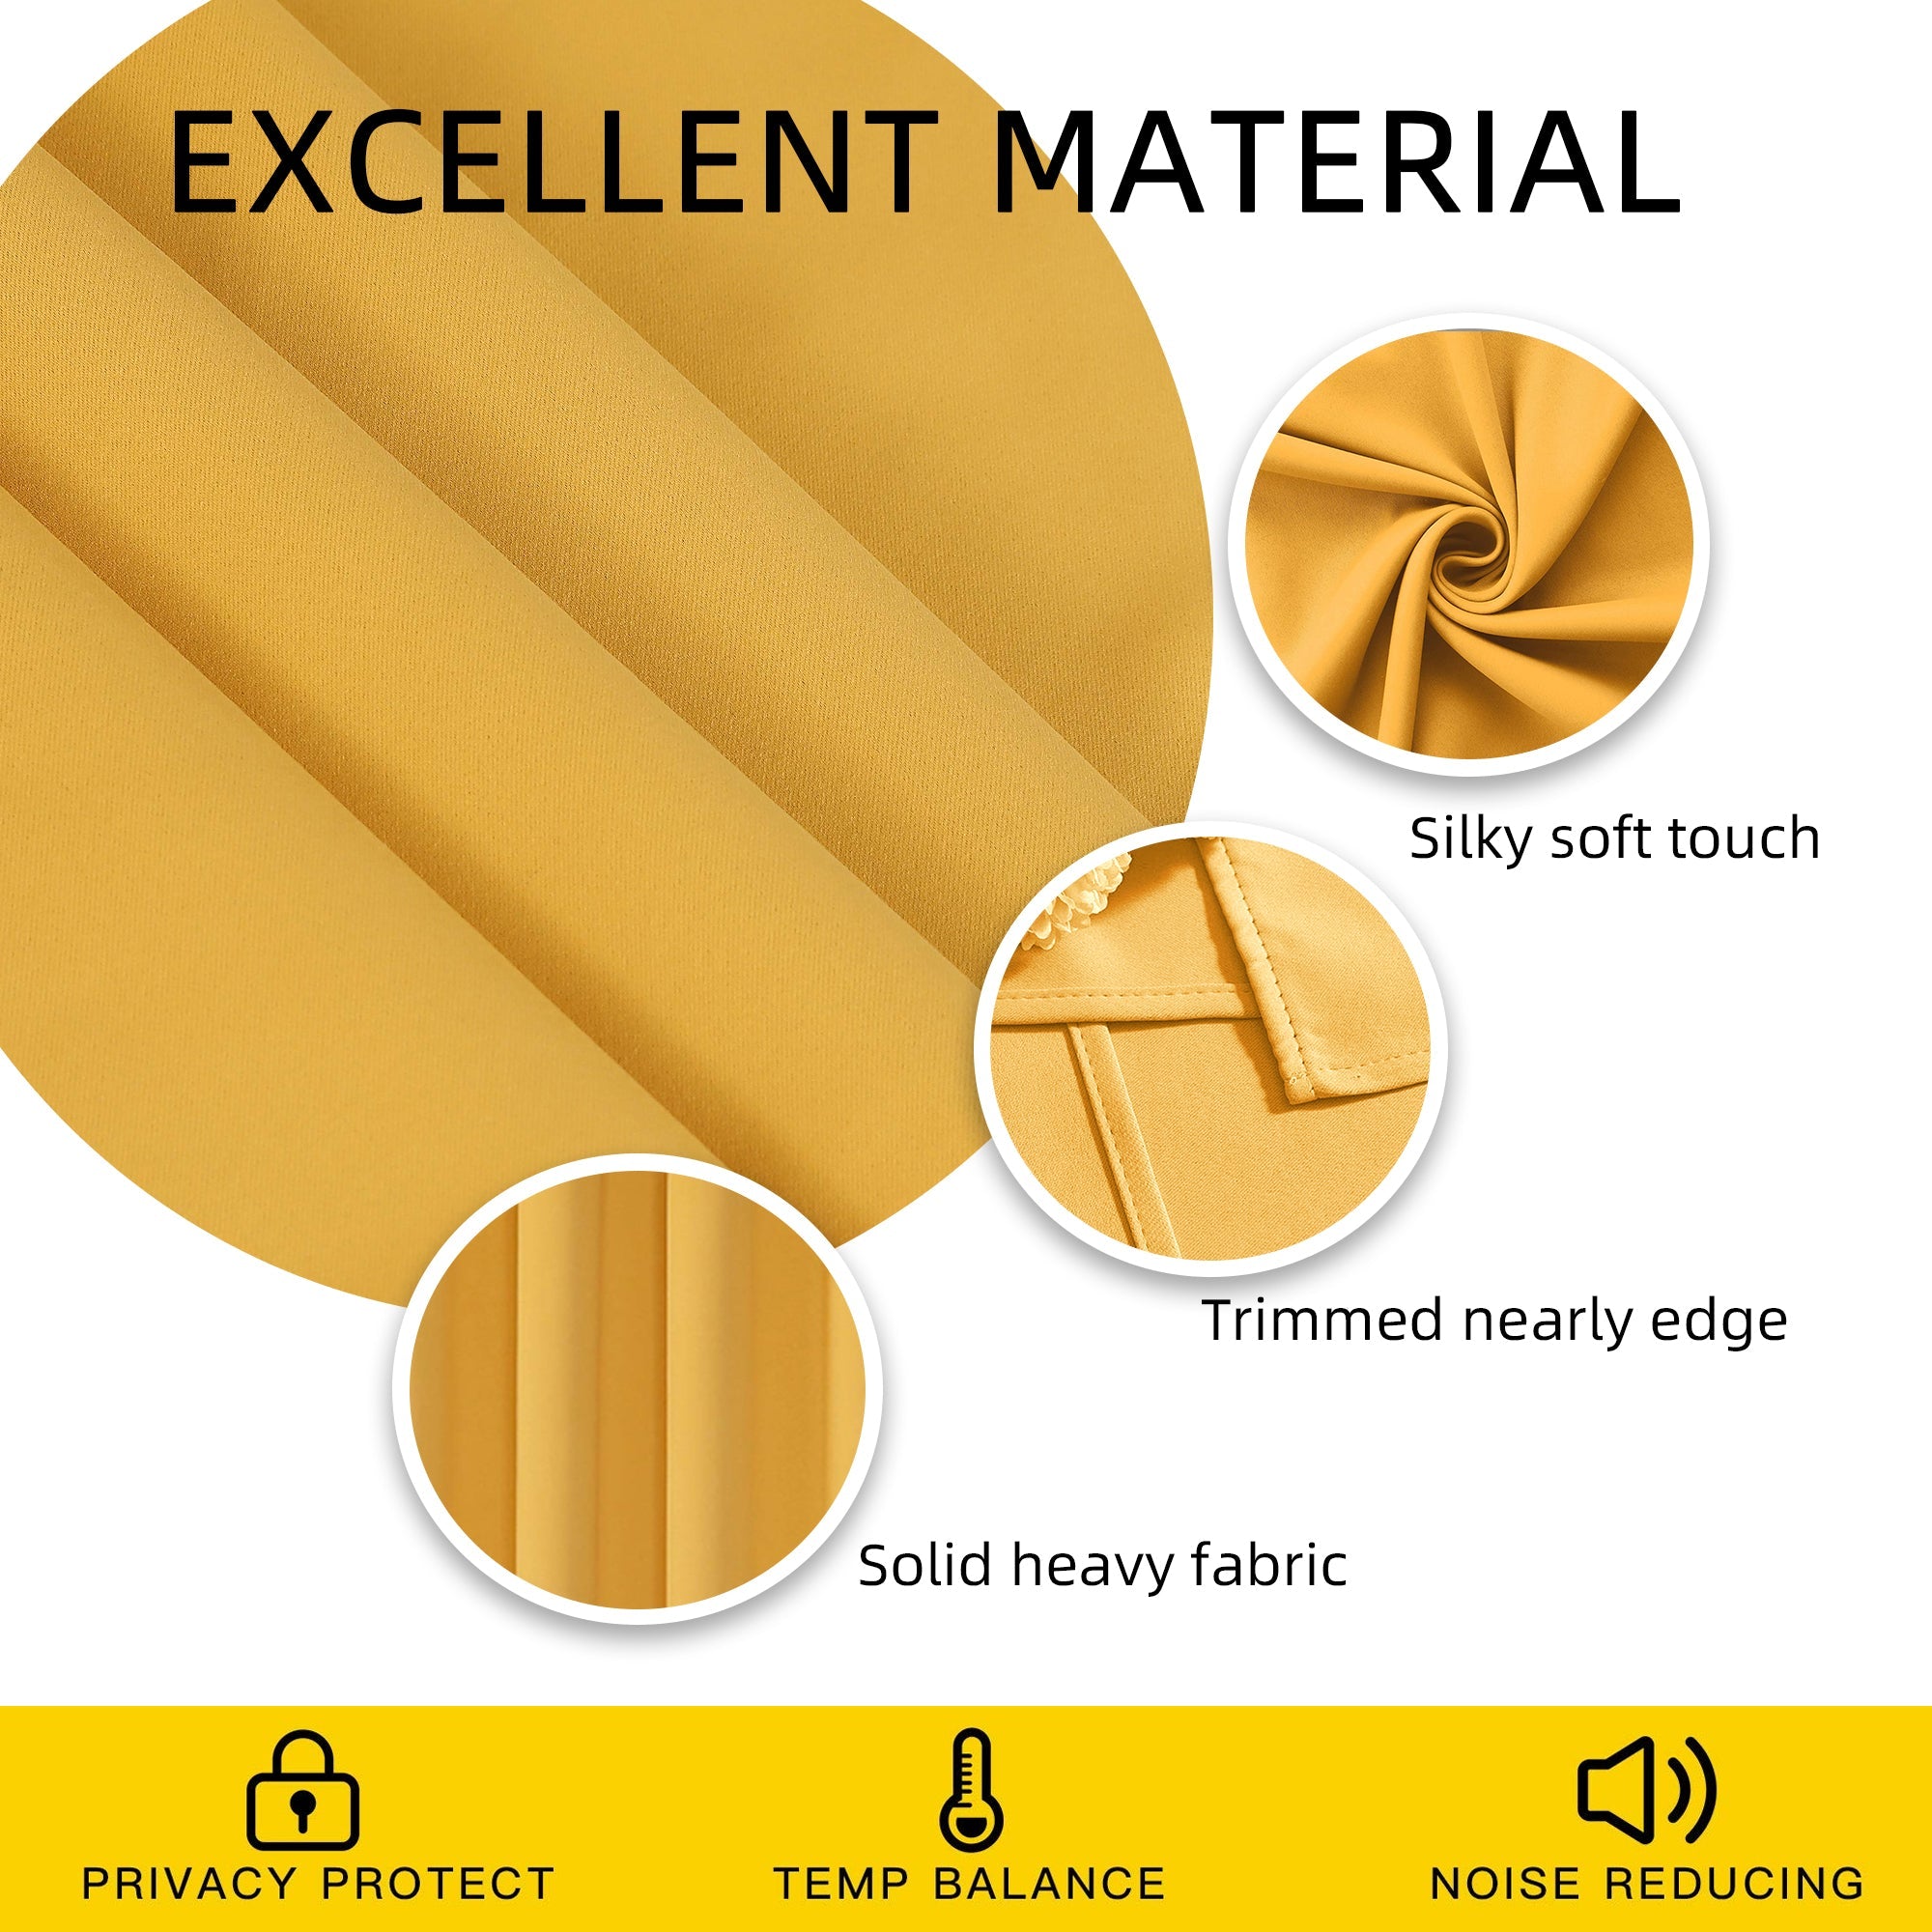 Akarise Blackout Curtains for Bedroom Living Room - 2 Panels, Yellow